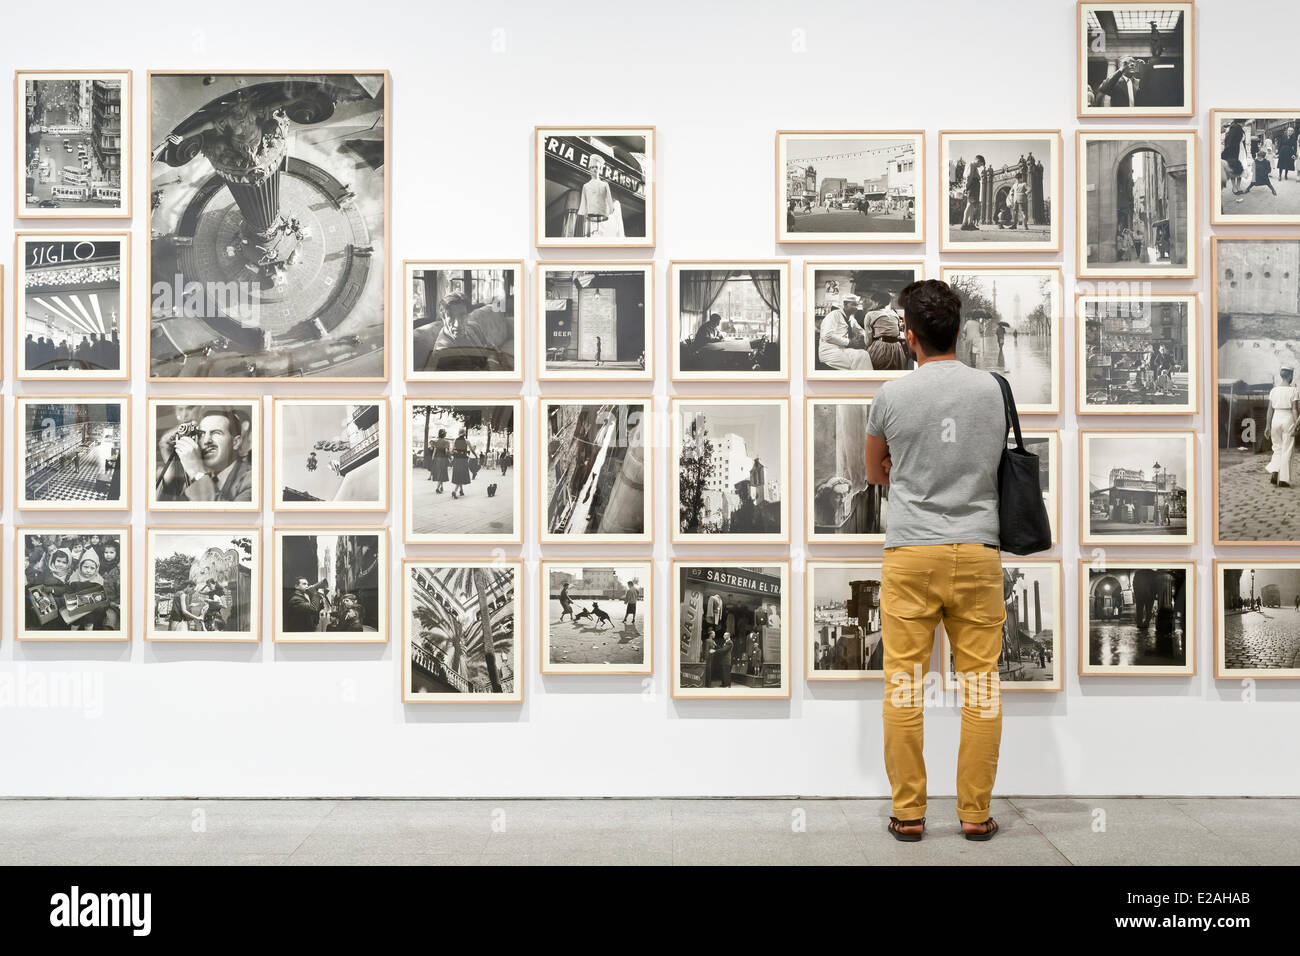 Spain, Madrid, National Museum Art Centre Reina Sofia, covers the period extending from 1900 to present, photographer Catalan Stock Photo